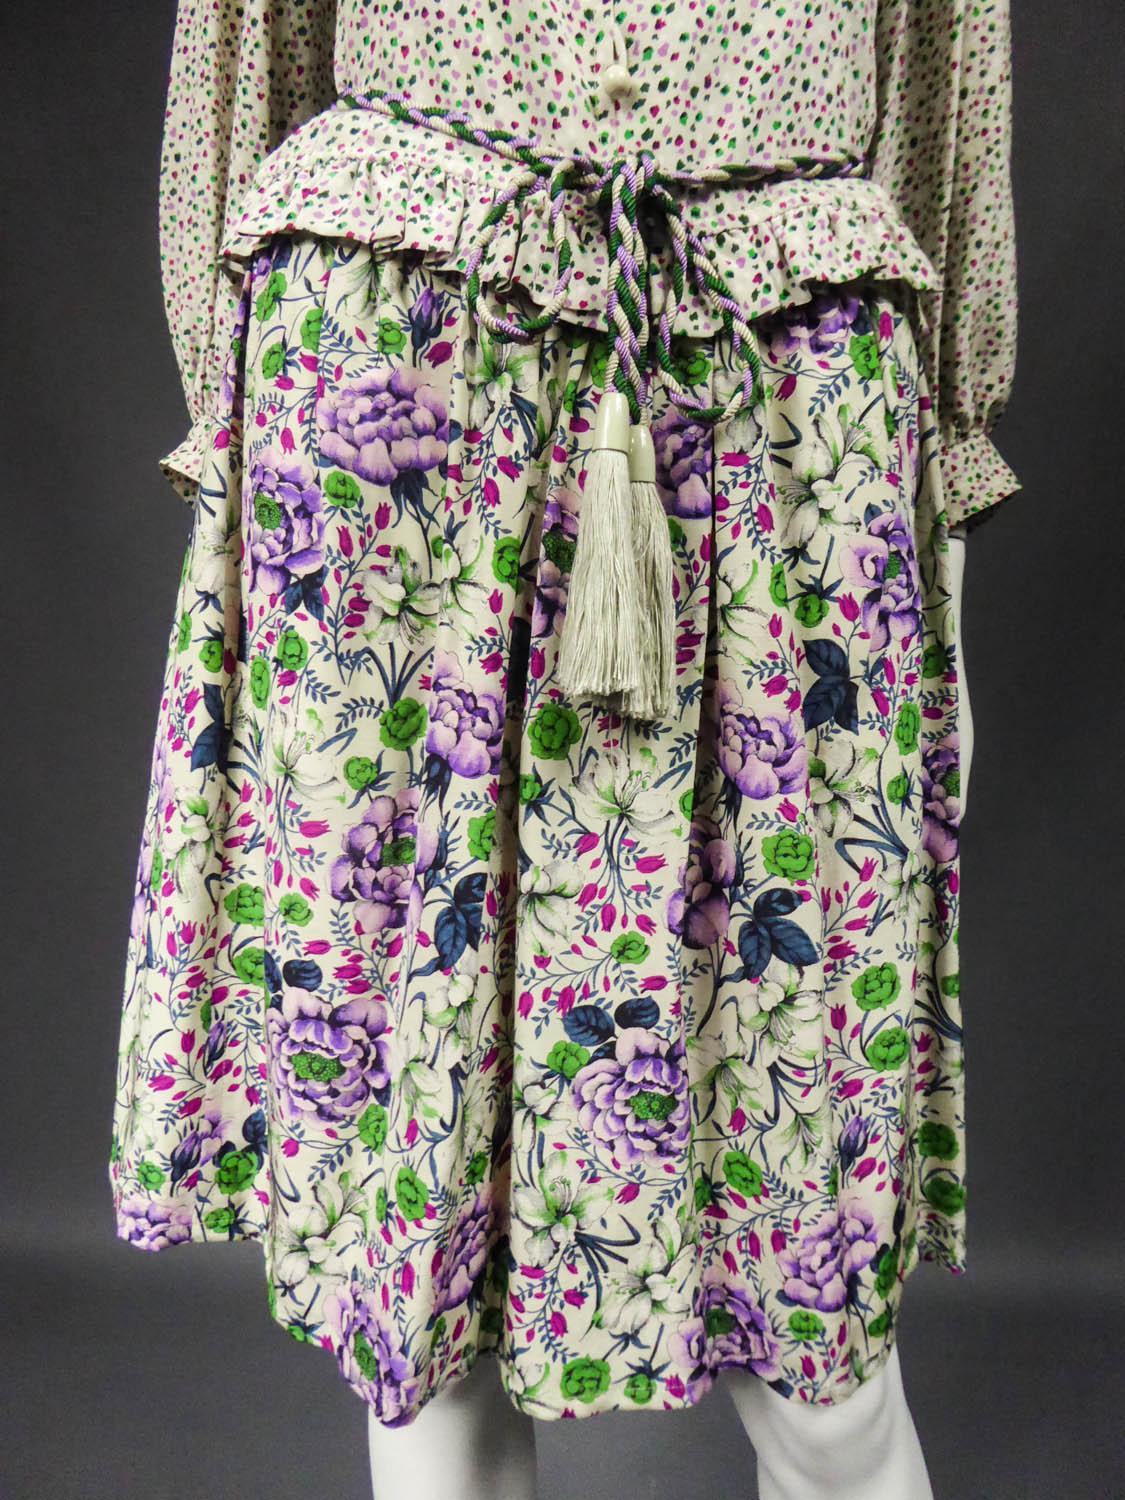 Circa 1978-1980
France

Ungaro Parallele skirt, blouse and belt set from the late 1970s. Interesting floral print on silk for the skirt and random pattern for the ruffled blouse. For the skirt, naturalistic flowers decor with large peonies, lily of